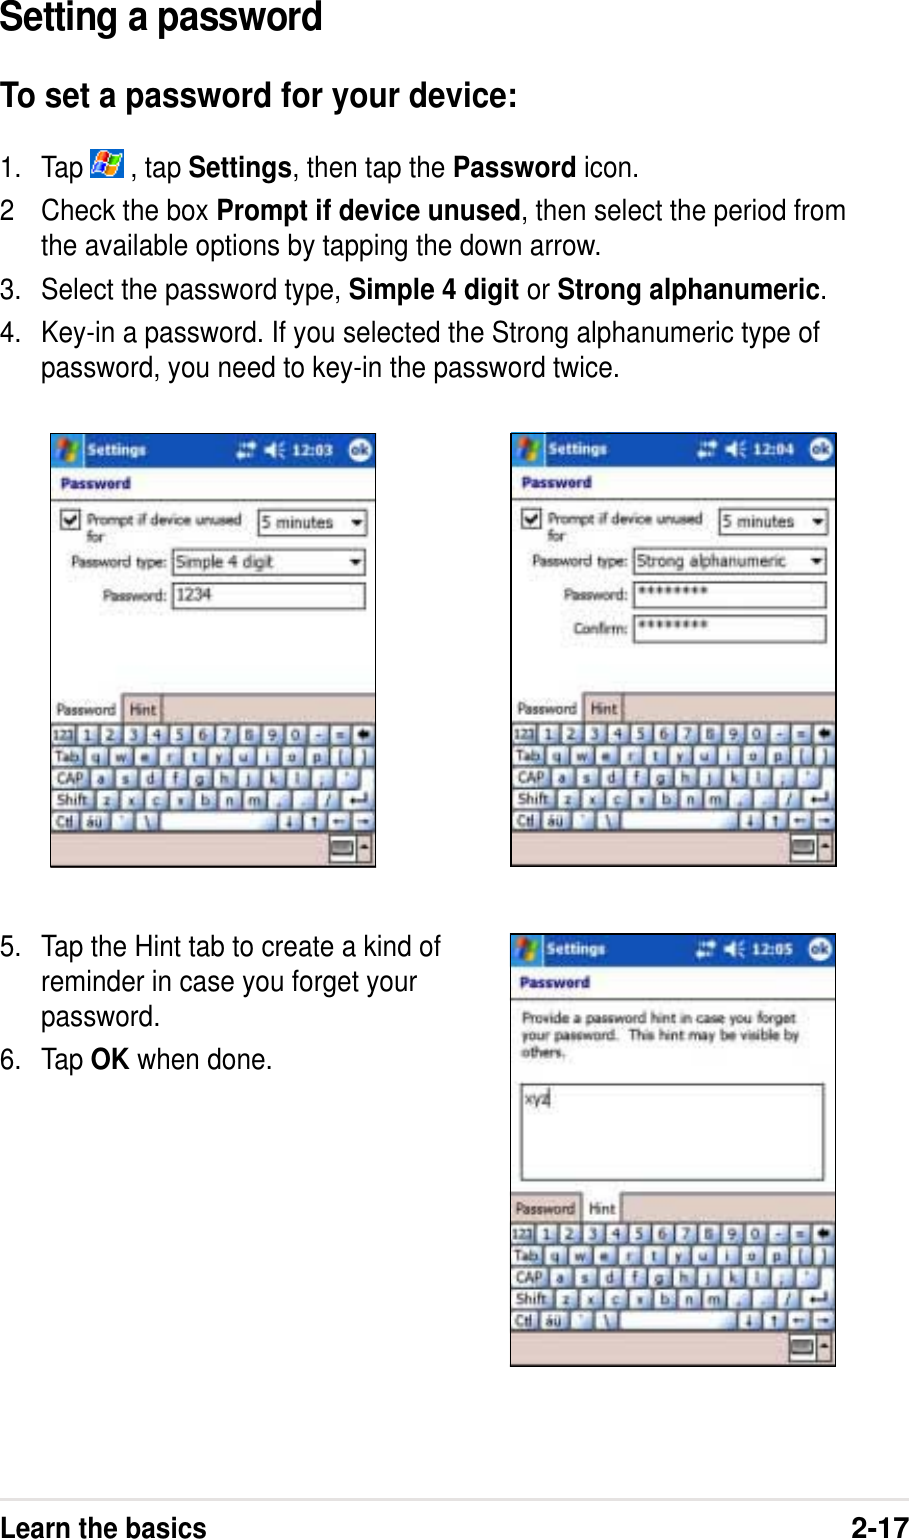 Learn the basics2-17Setting a passwordTo set a password for your device:1. Tap   , tap Settings, then tap the Password icon.2 Check the box Prompt if device unused, then select the period fromthe available options by tapping the down arrow.3. Select the password type, Simple 4 digit or Strong alphanumeric.4. Key-in a password. If you selected the Strong alphanumeric type ofpassword, you need to key-in the password twice.5. Tap the Hint tab to create a kind ofreminder in case you forget yourpassword.6. Tap OK when done.